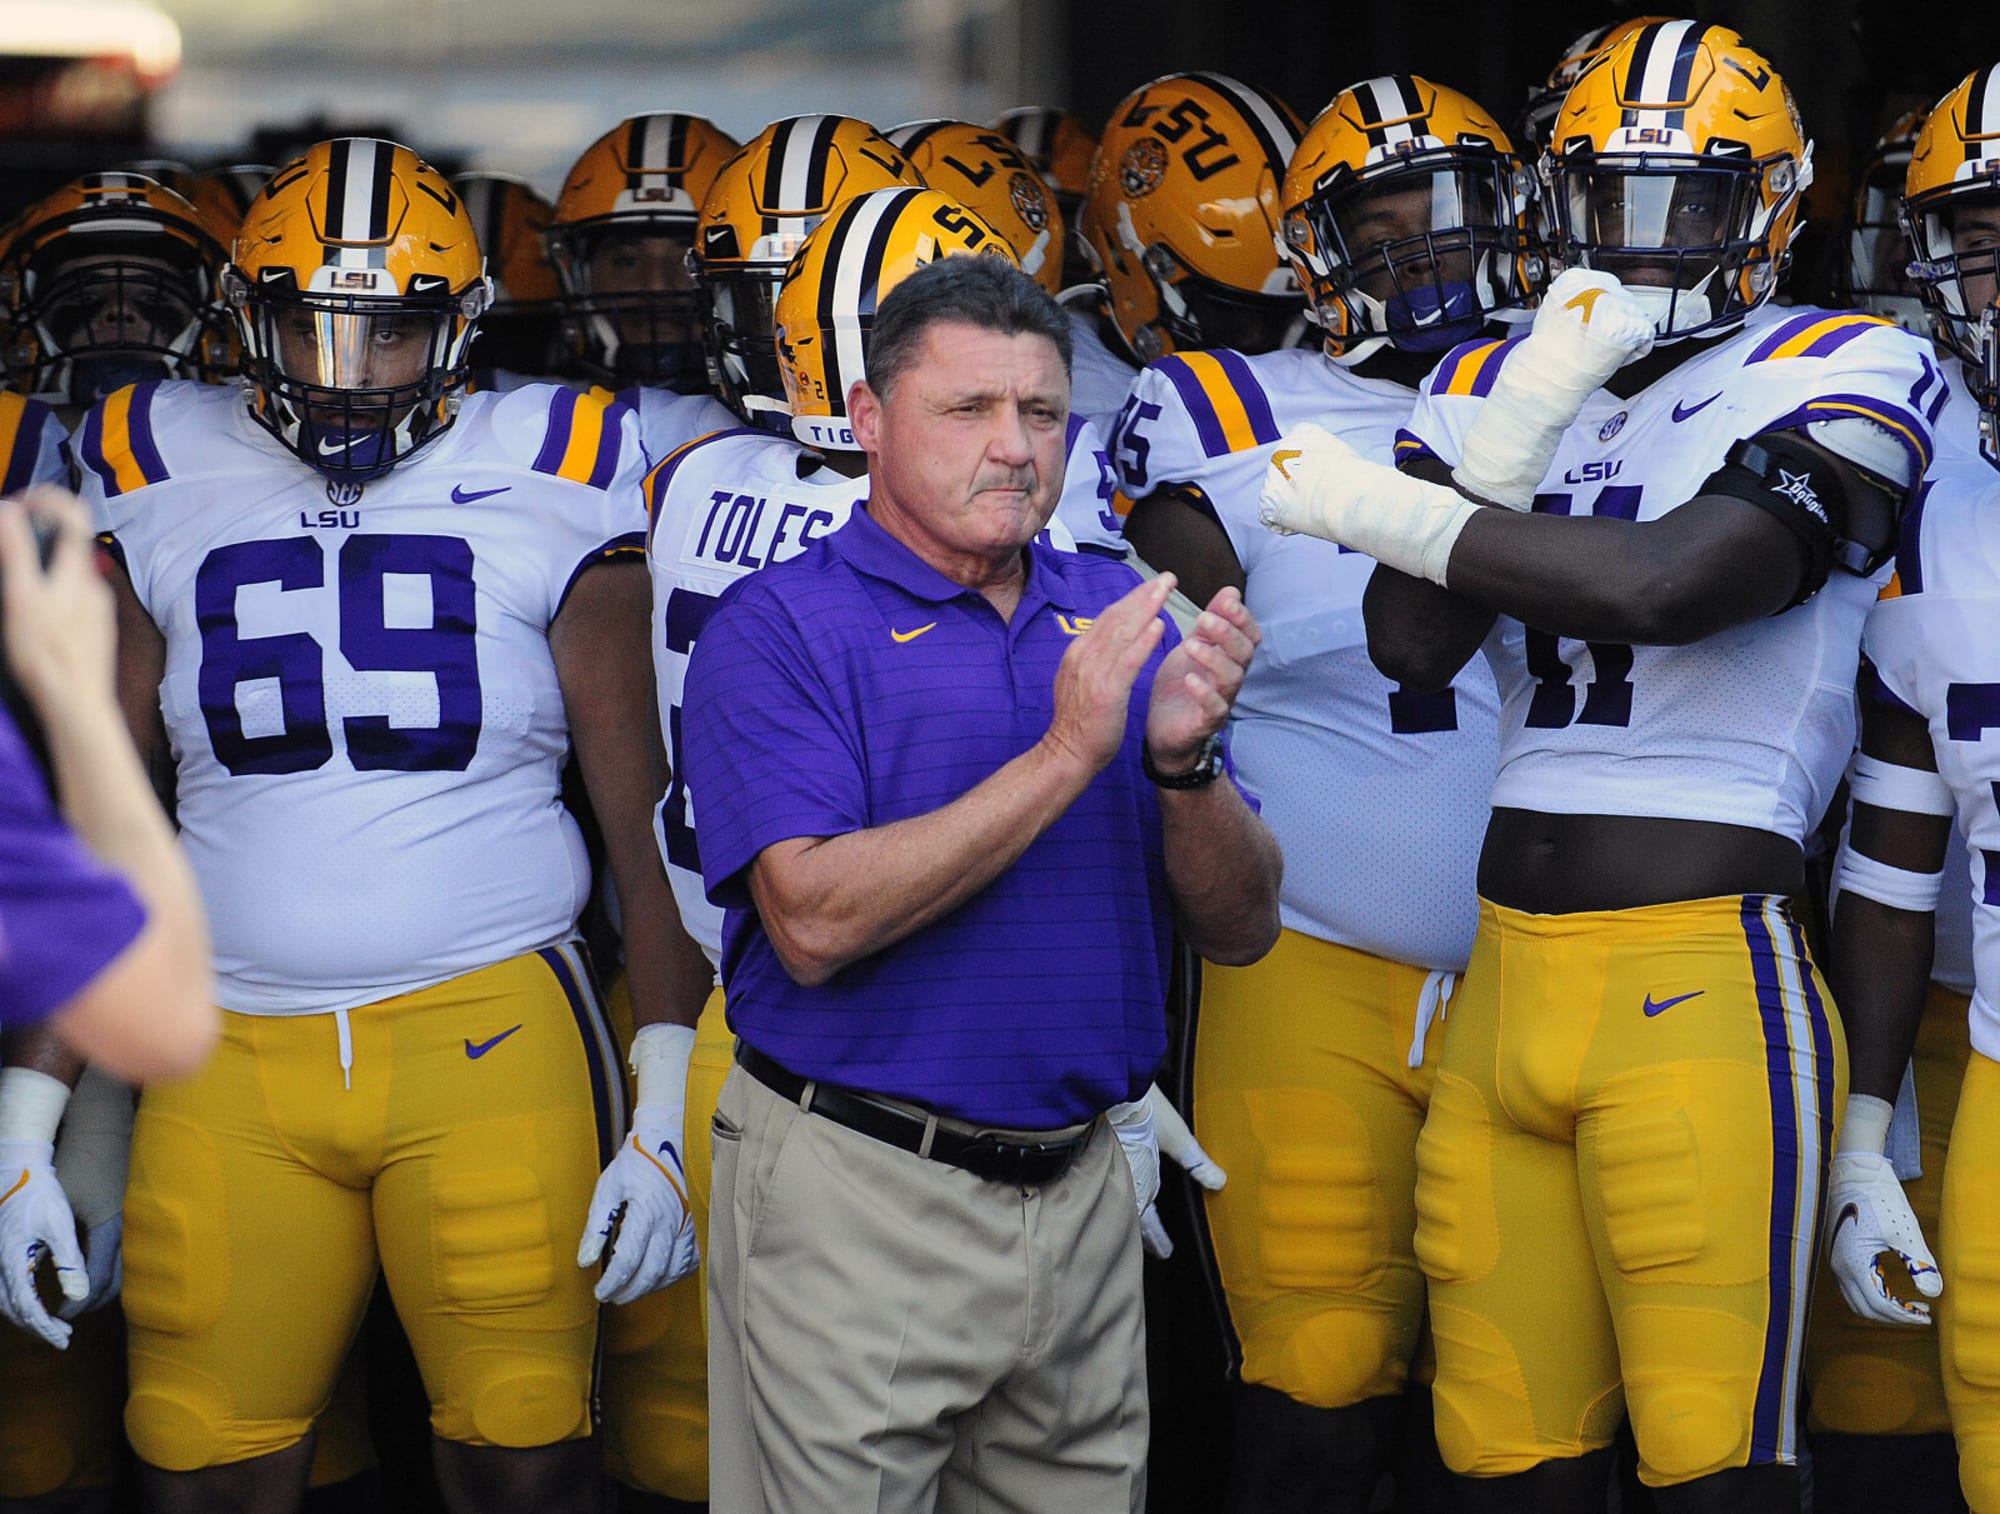 Lsu Football Schedule For 2022 2022 Lsu Football Schedule: Complete List Of Tigers Games